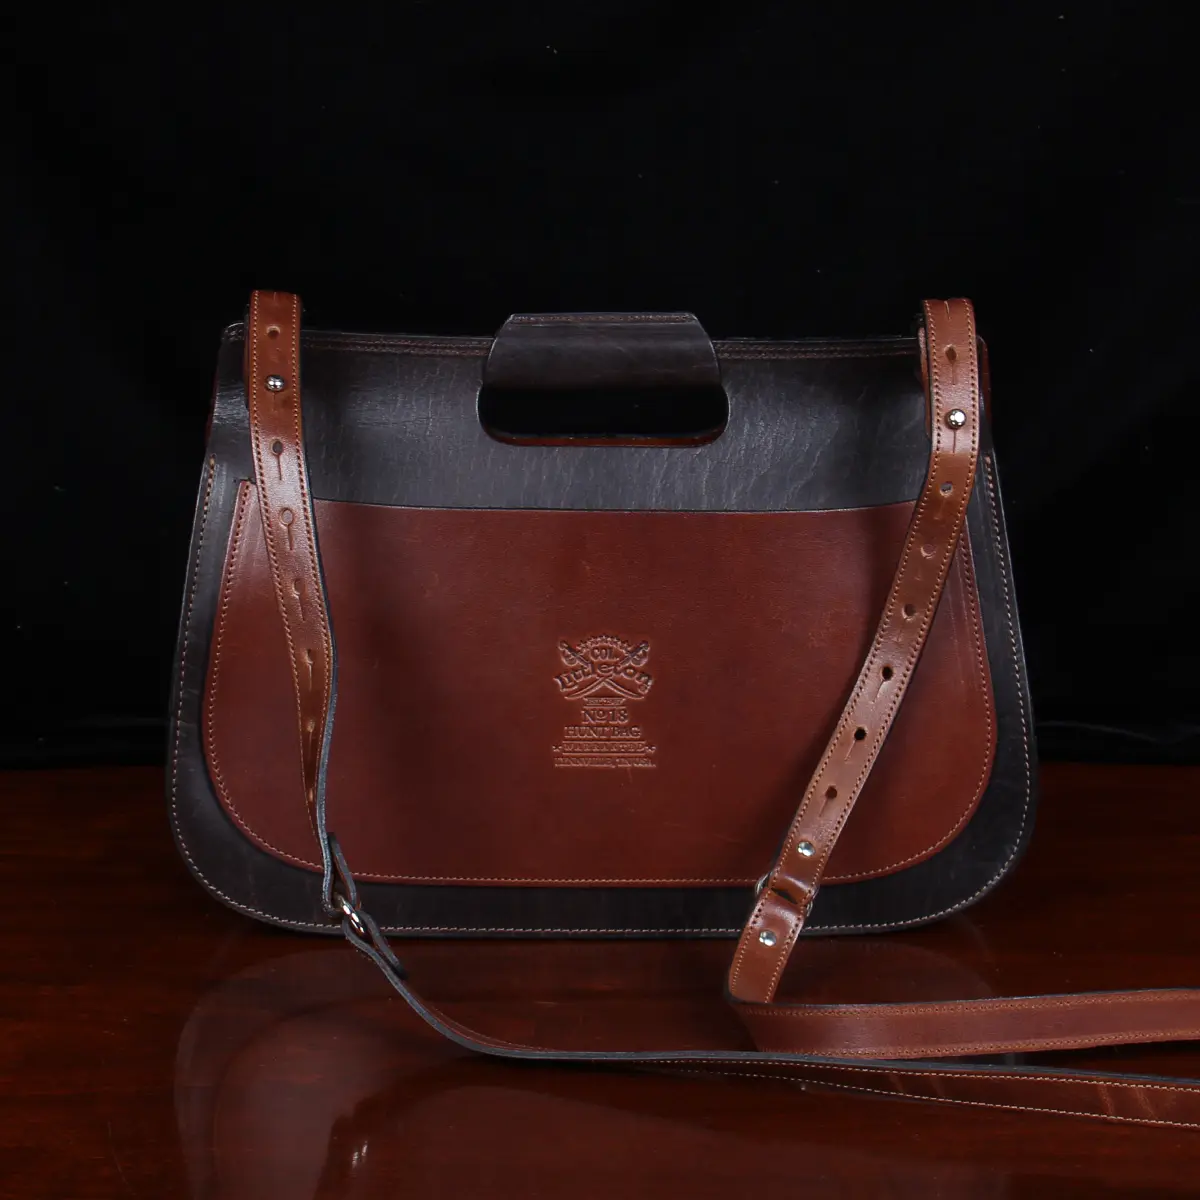 no 18 leather huntbag in tobacco buffalo - back view - on a wood table with dark background